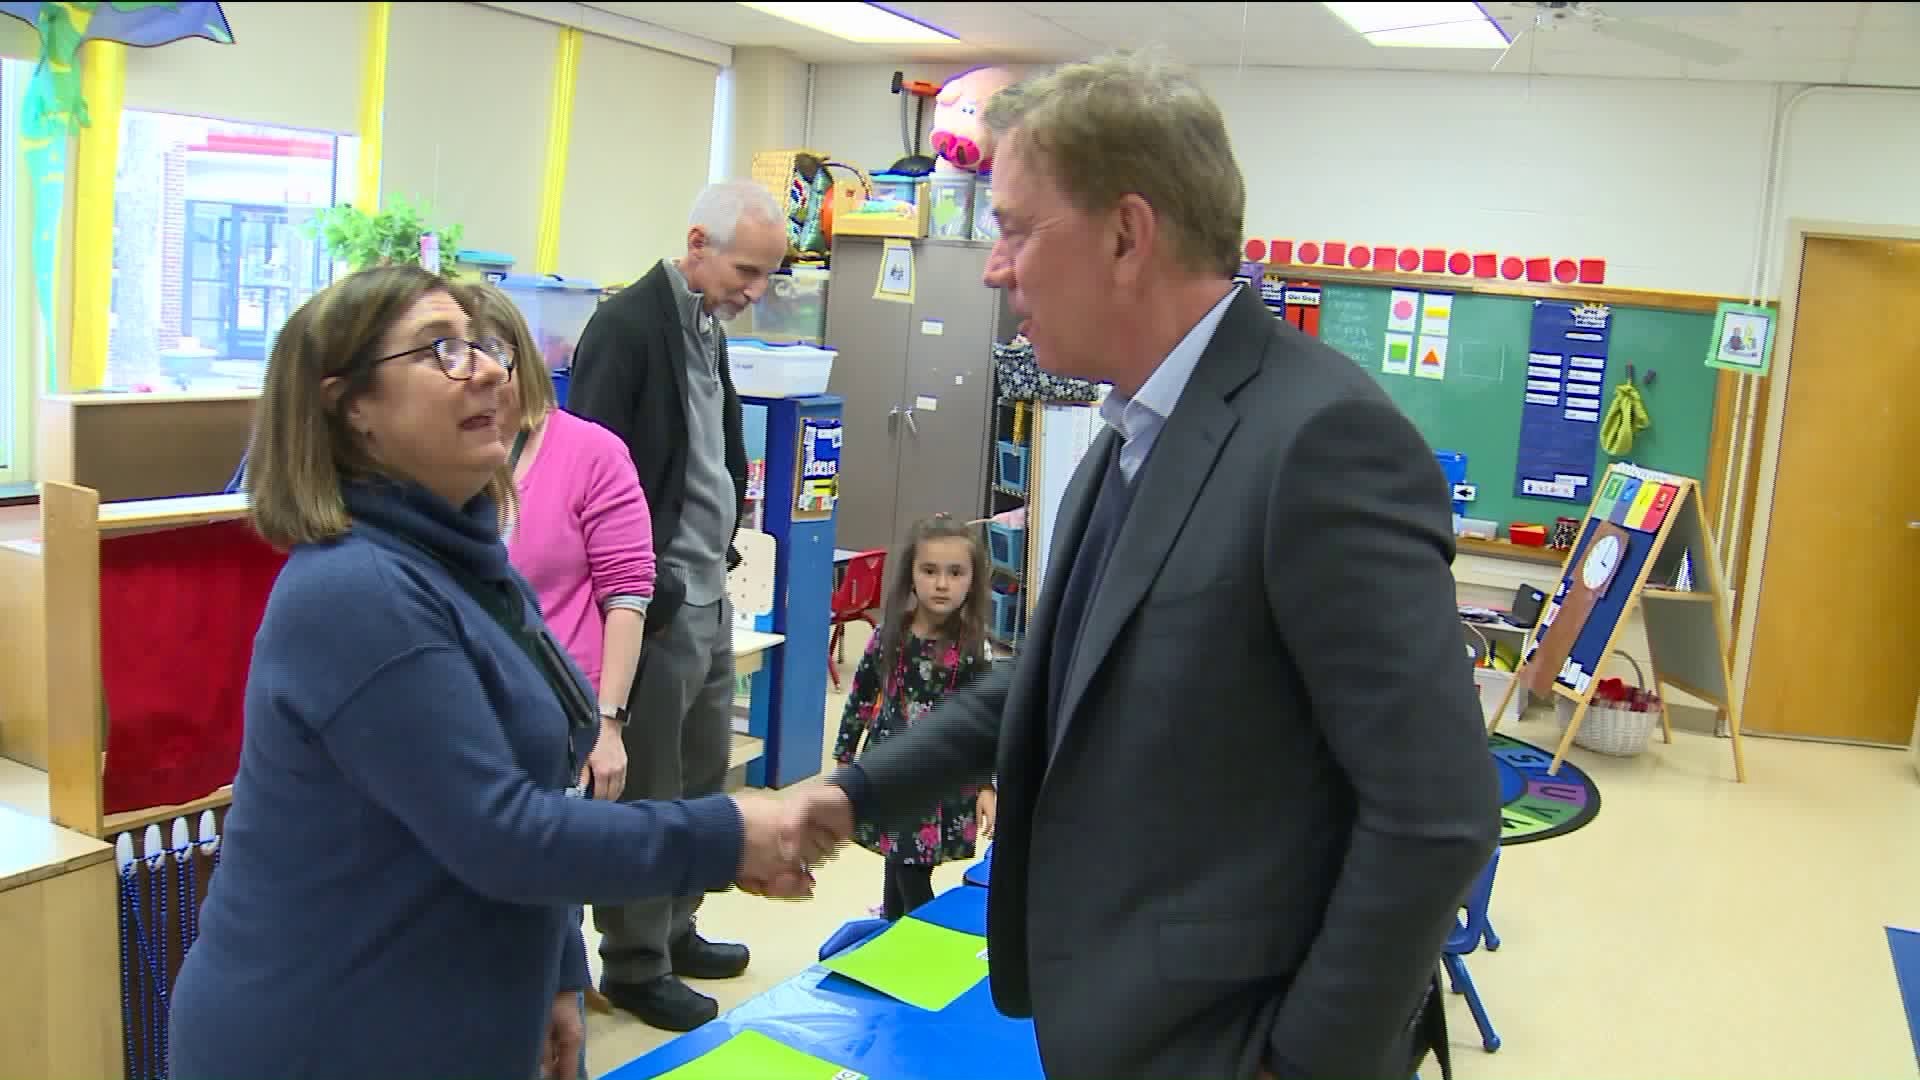 Lamont tours school to push for reform